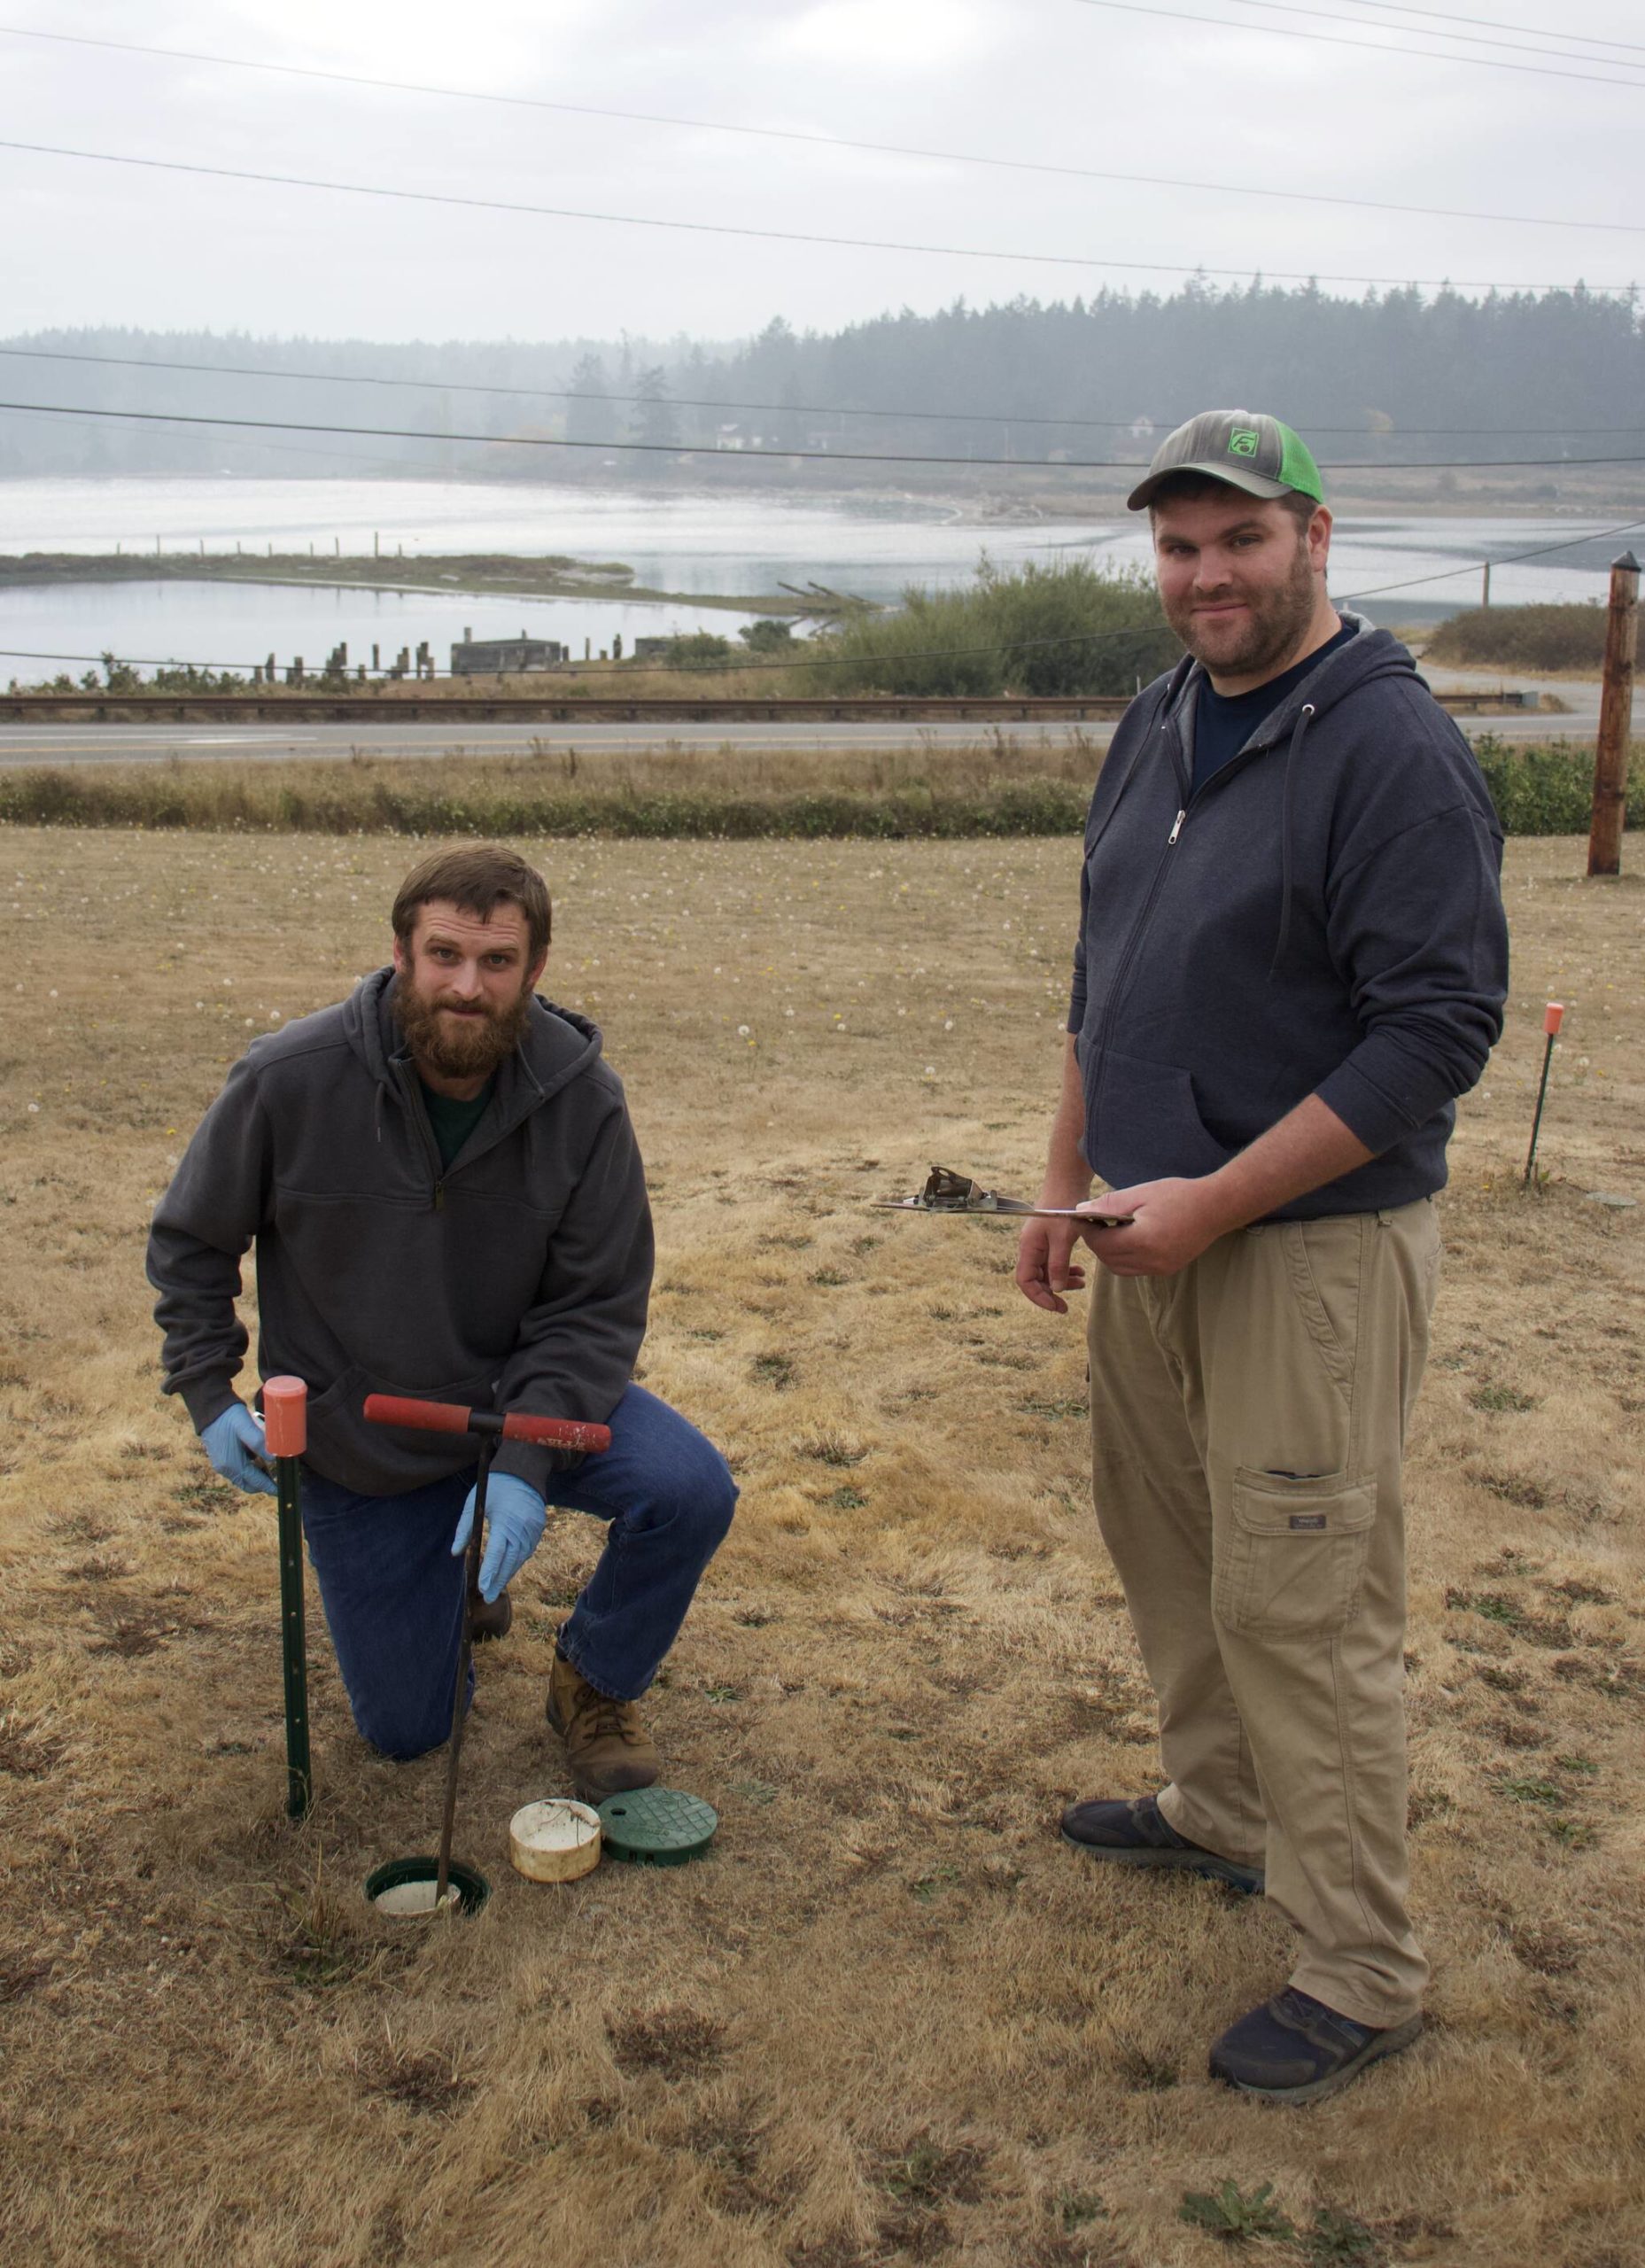 Photo by Rachel Rosen/Whidbey News-Times
Ben Miller (left) and his brother Seth (right) own Whidbey Septic. Seth is inspecting the final part of a home’s septic system; the last stop before wastewater enters the groundwater.